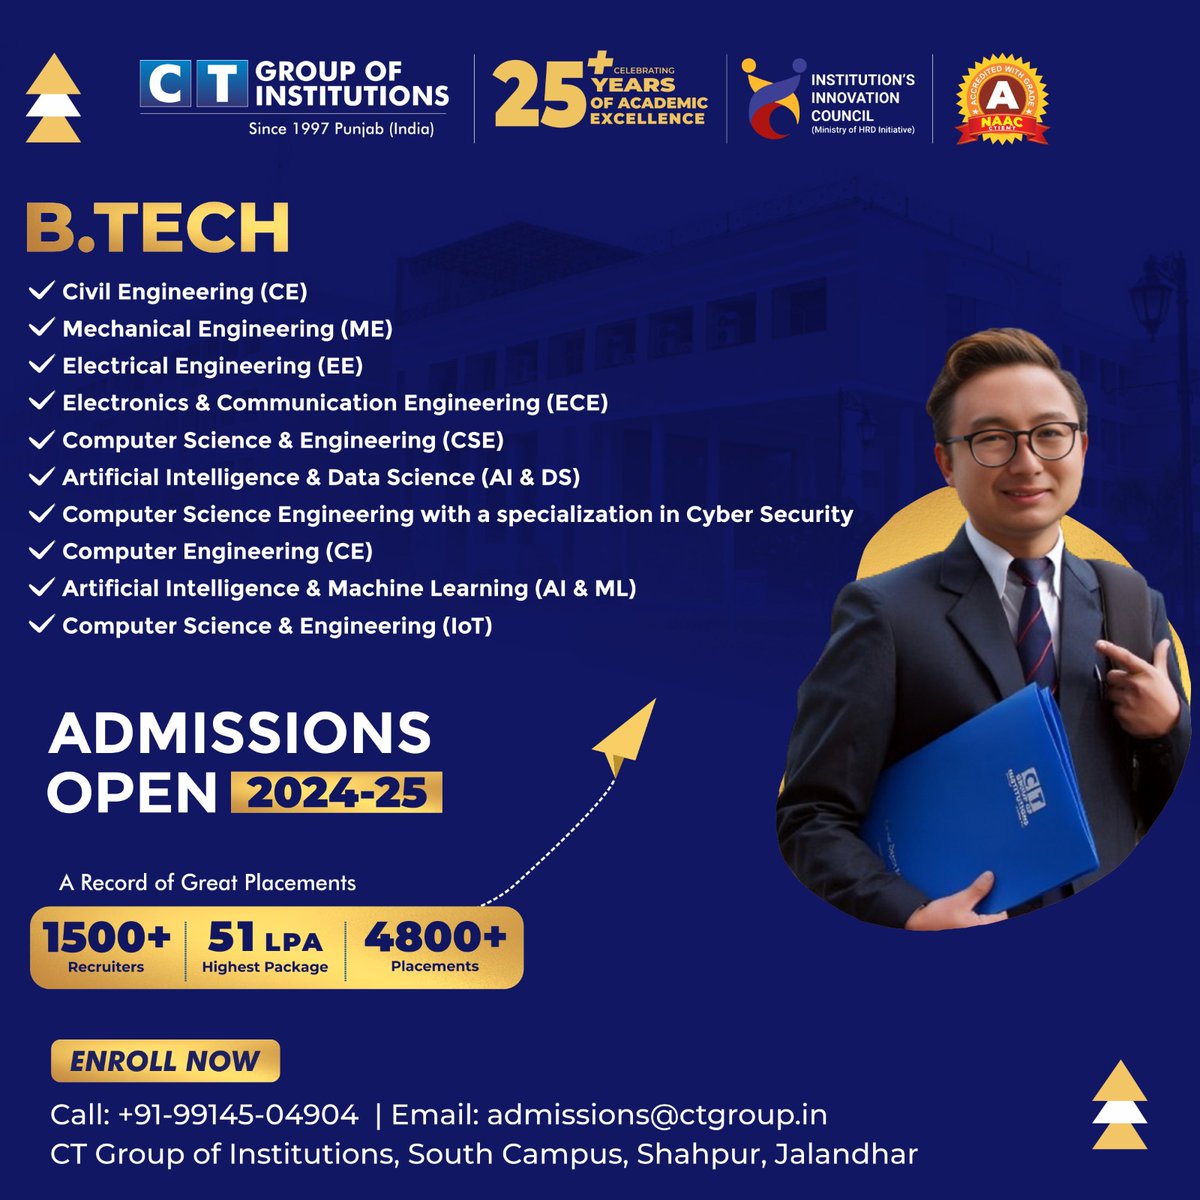 🎓Admissions Open 2024-25 at CT Group of Institutions!🎉 Shape your future with our cutting-edge B.Tech programs. #ctgroup #admissionopen2024_2025 #btech #cse #computerengineering #electrical #engineers #engineering #jalandhar #NaacA #ctiemt